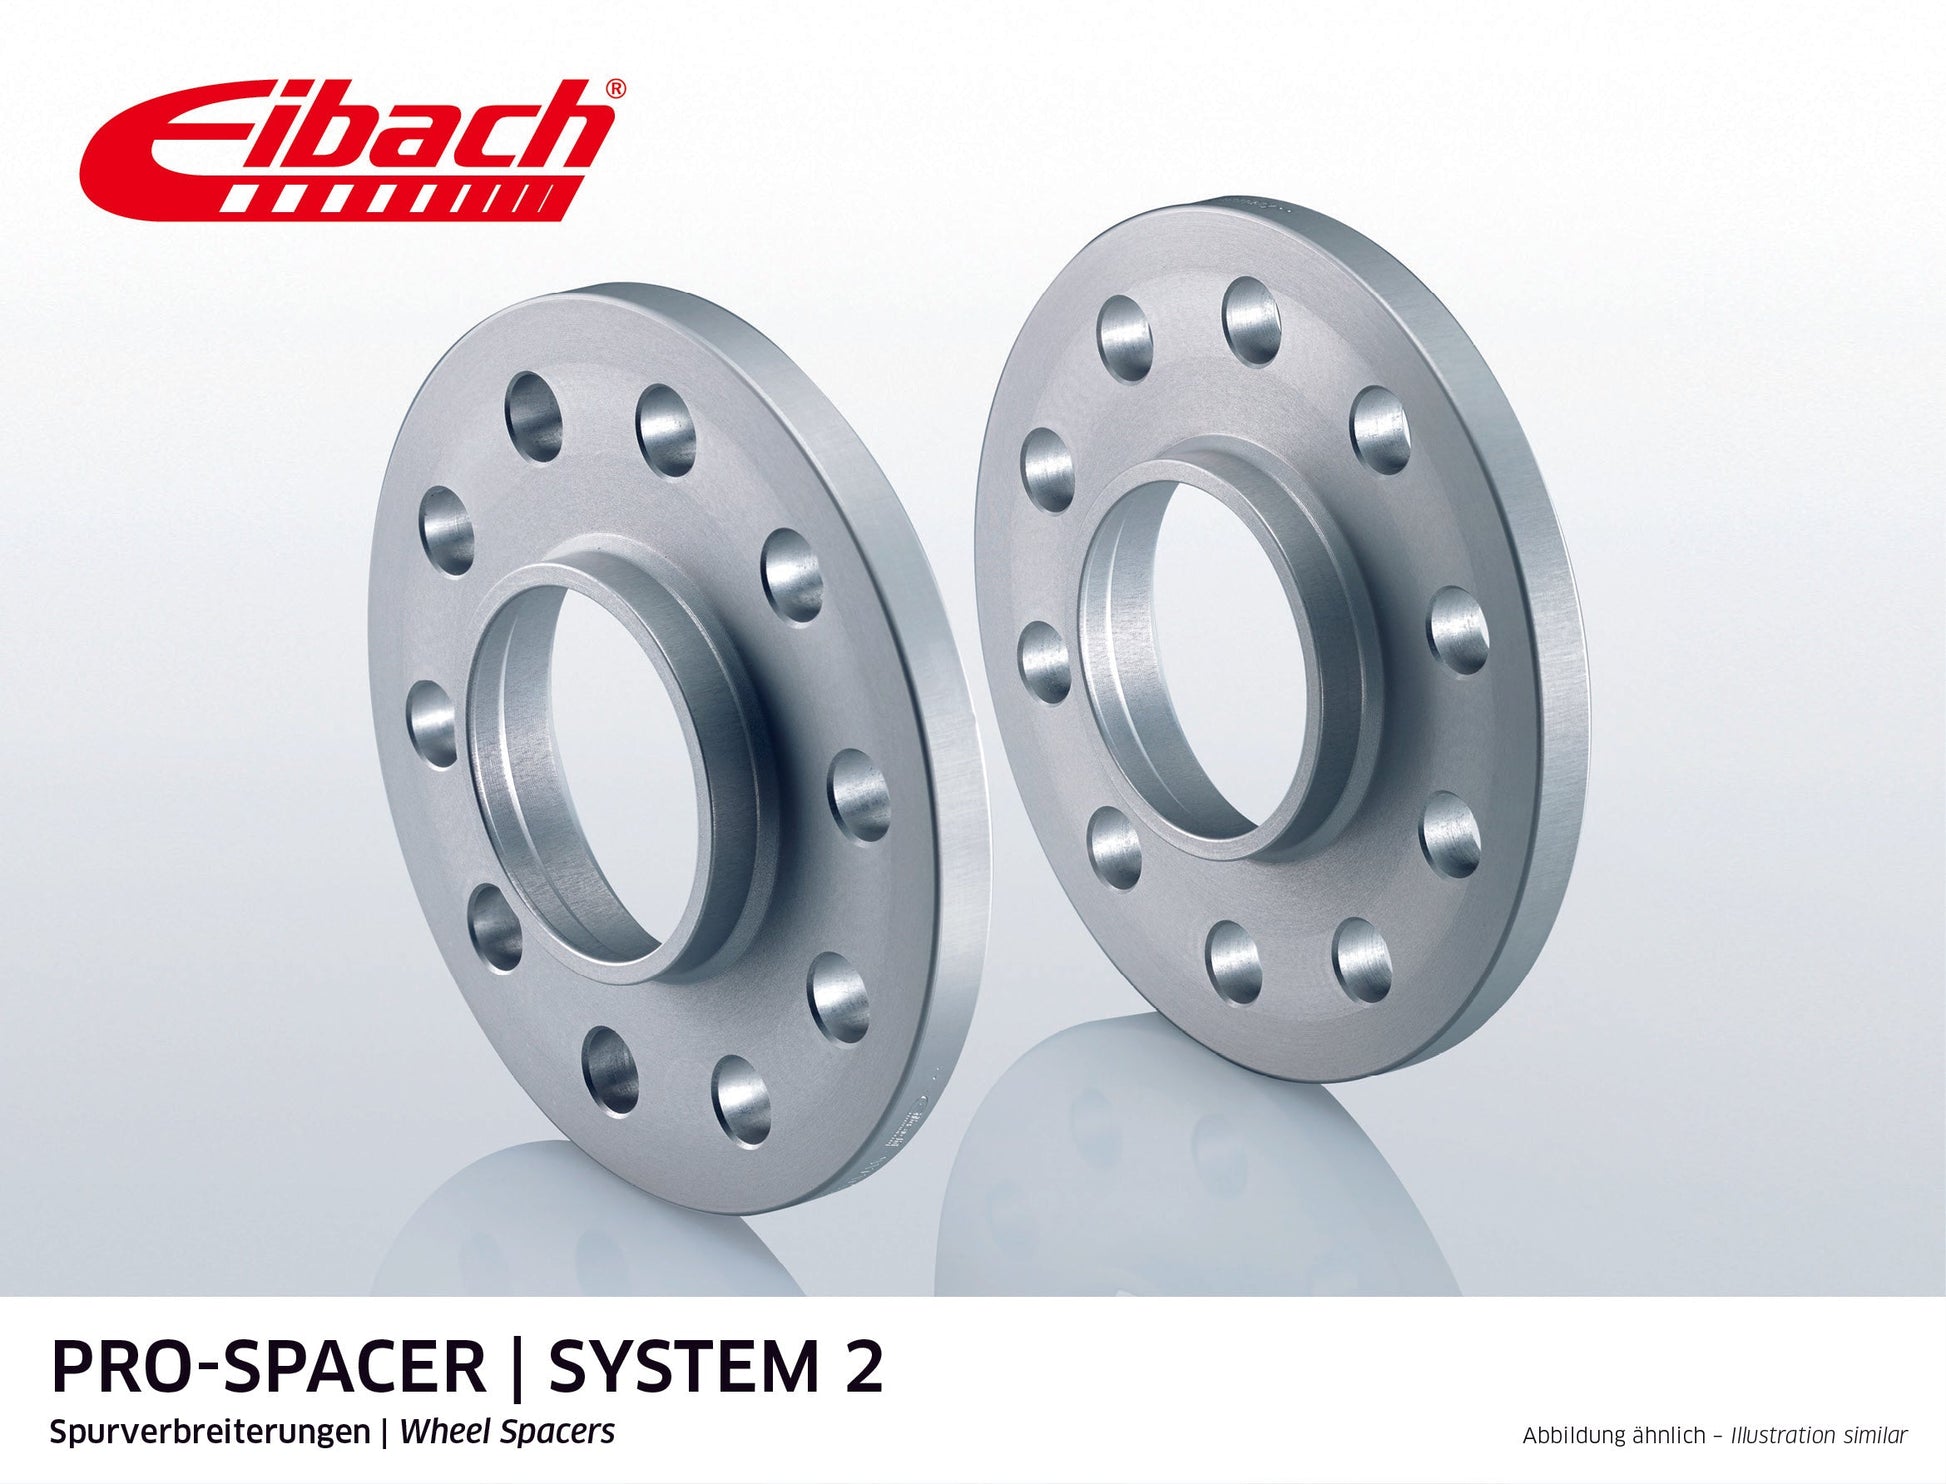 Eibach Pro-Spacer Kit (Pair Of Spacers) 10mm Per Spacer (System 2) S90-2-10-038 (Silver) at £103.59